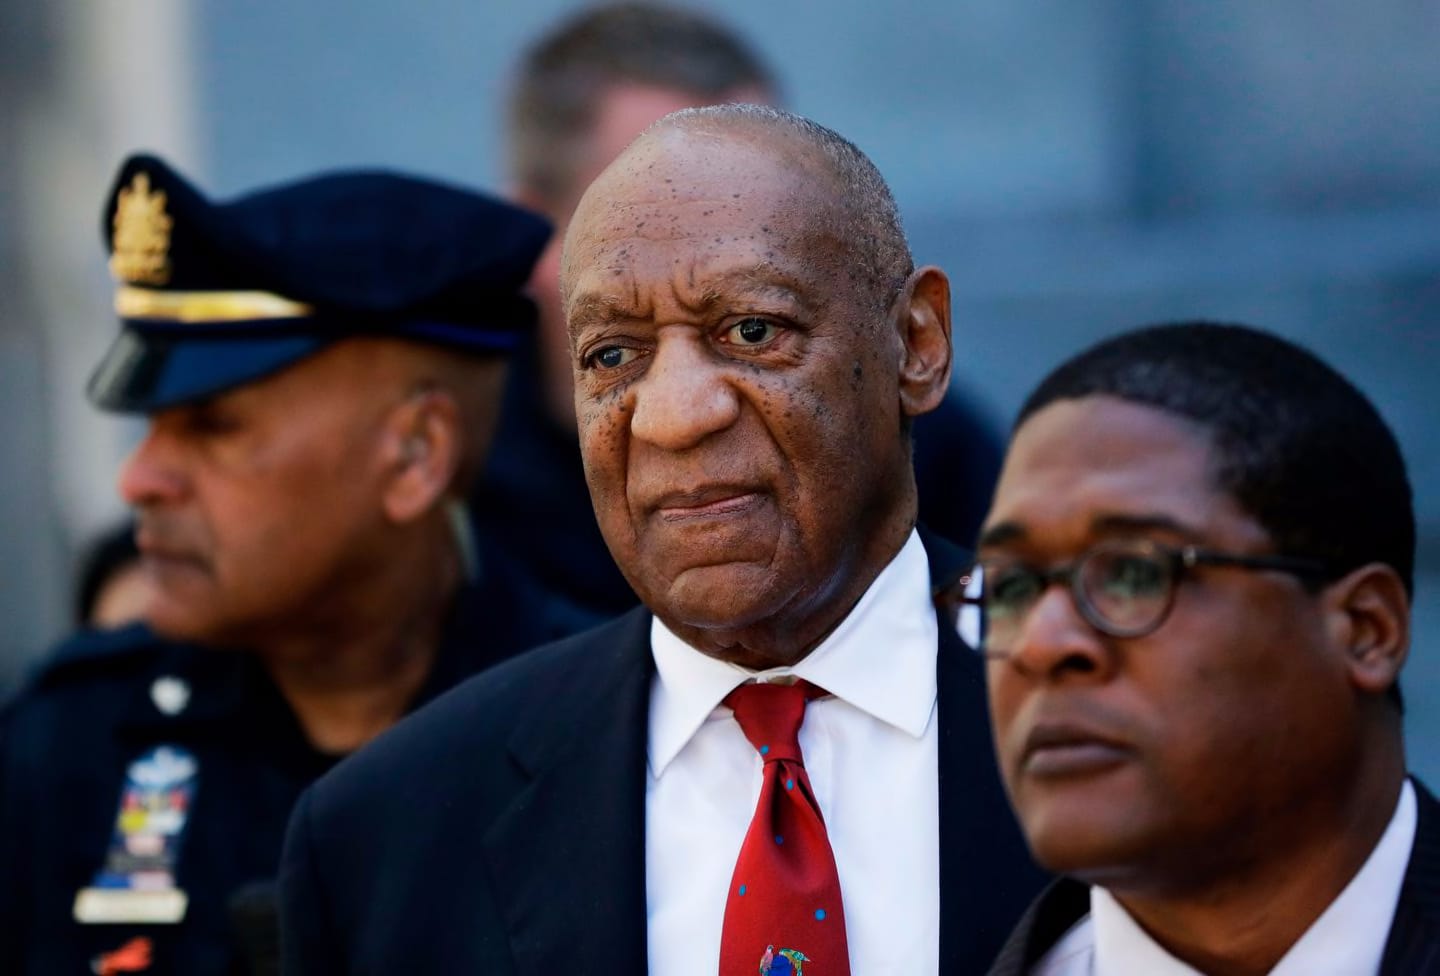 Bill Cosby left court after being convicted in 2018 of drugging and molesting a woman.